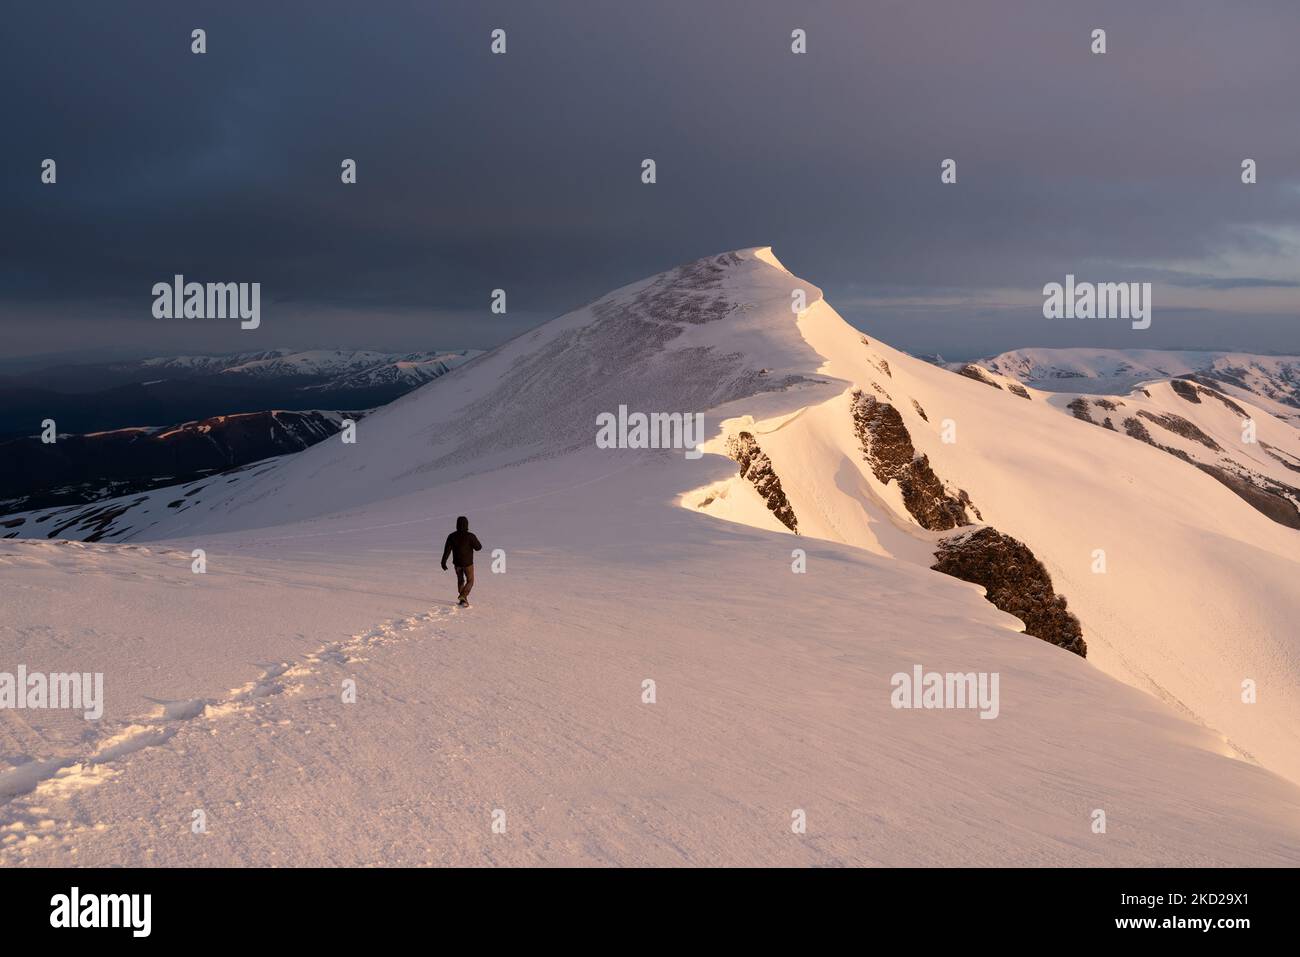 Cold weather mountains hiking in snow Stock Photo